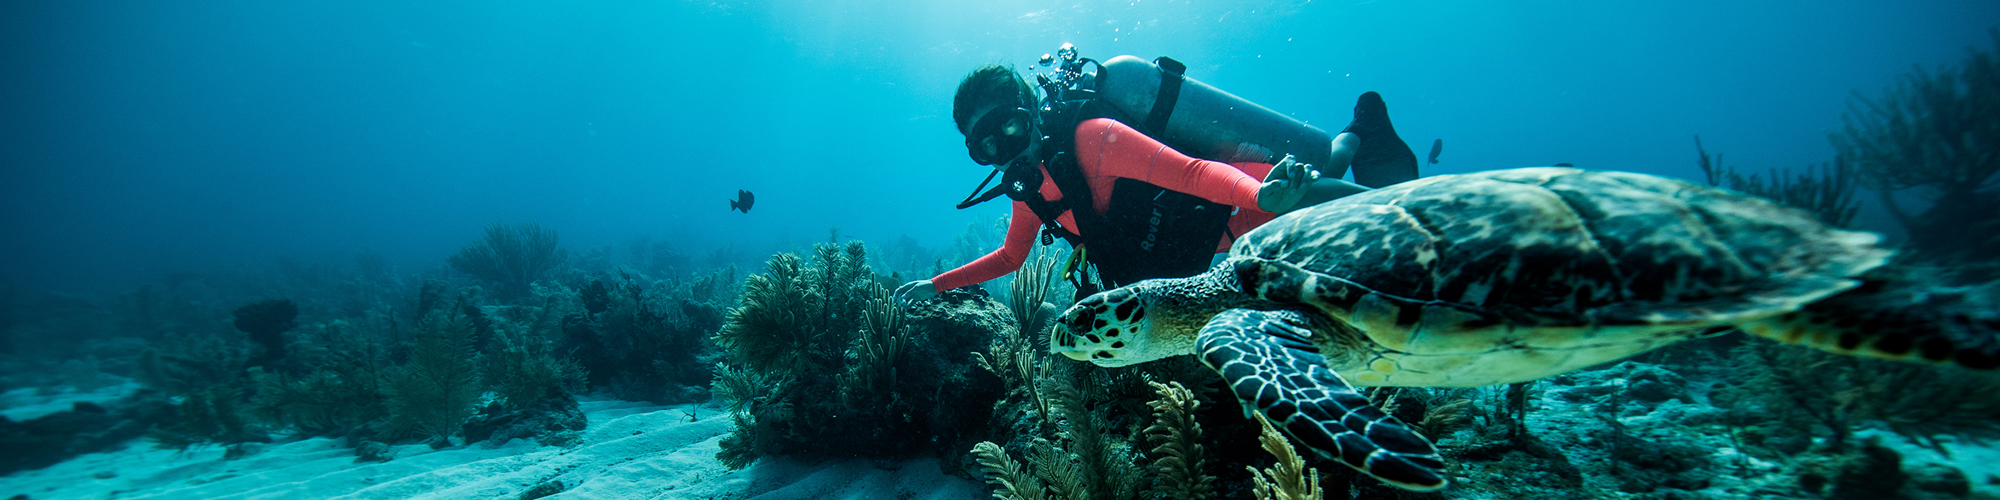 Woman scuba diving with a Turtle in Belize.